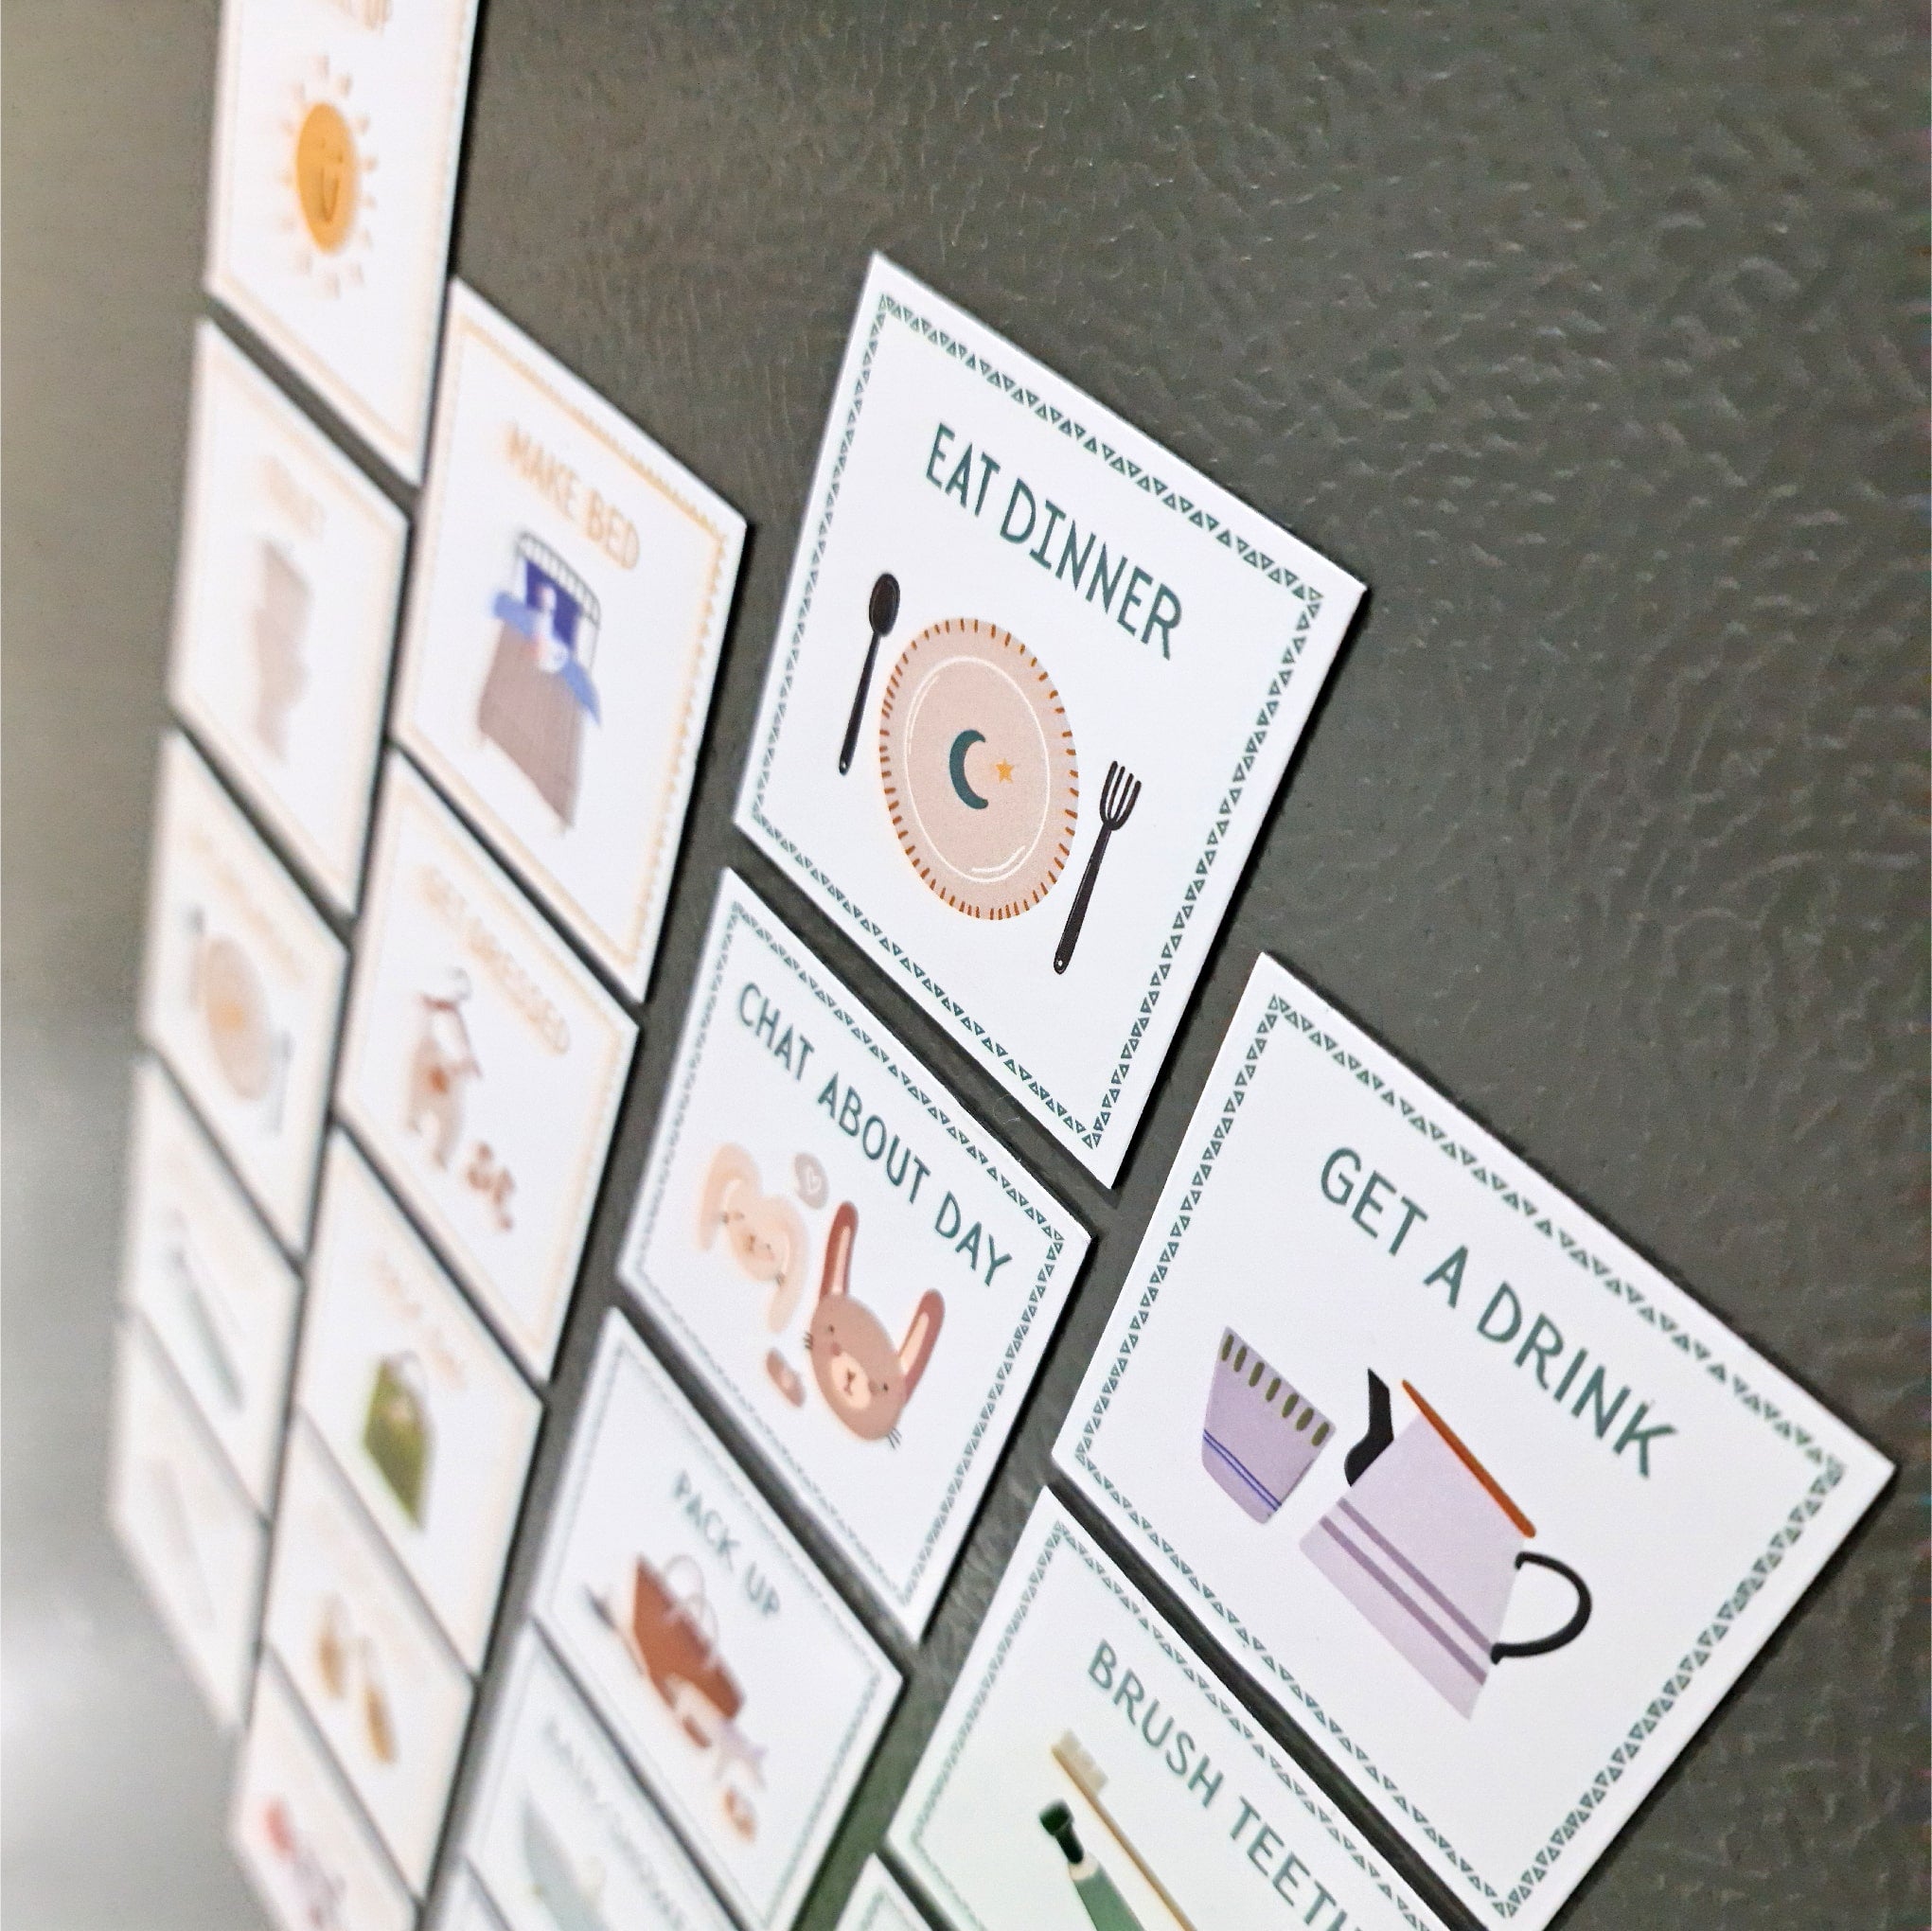 20 Magnetic Routine Cards